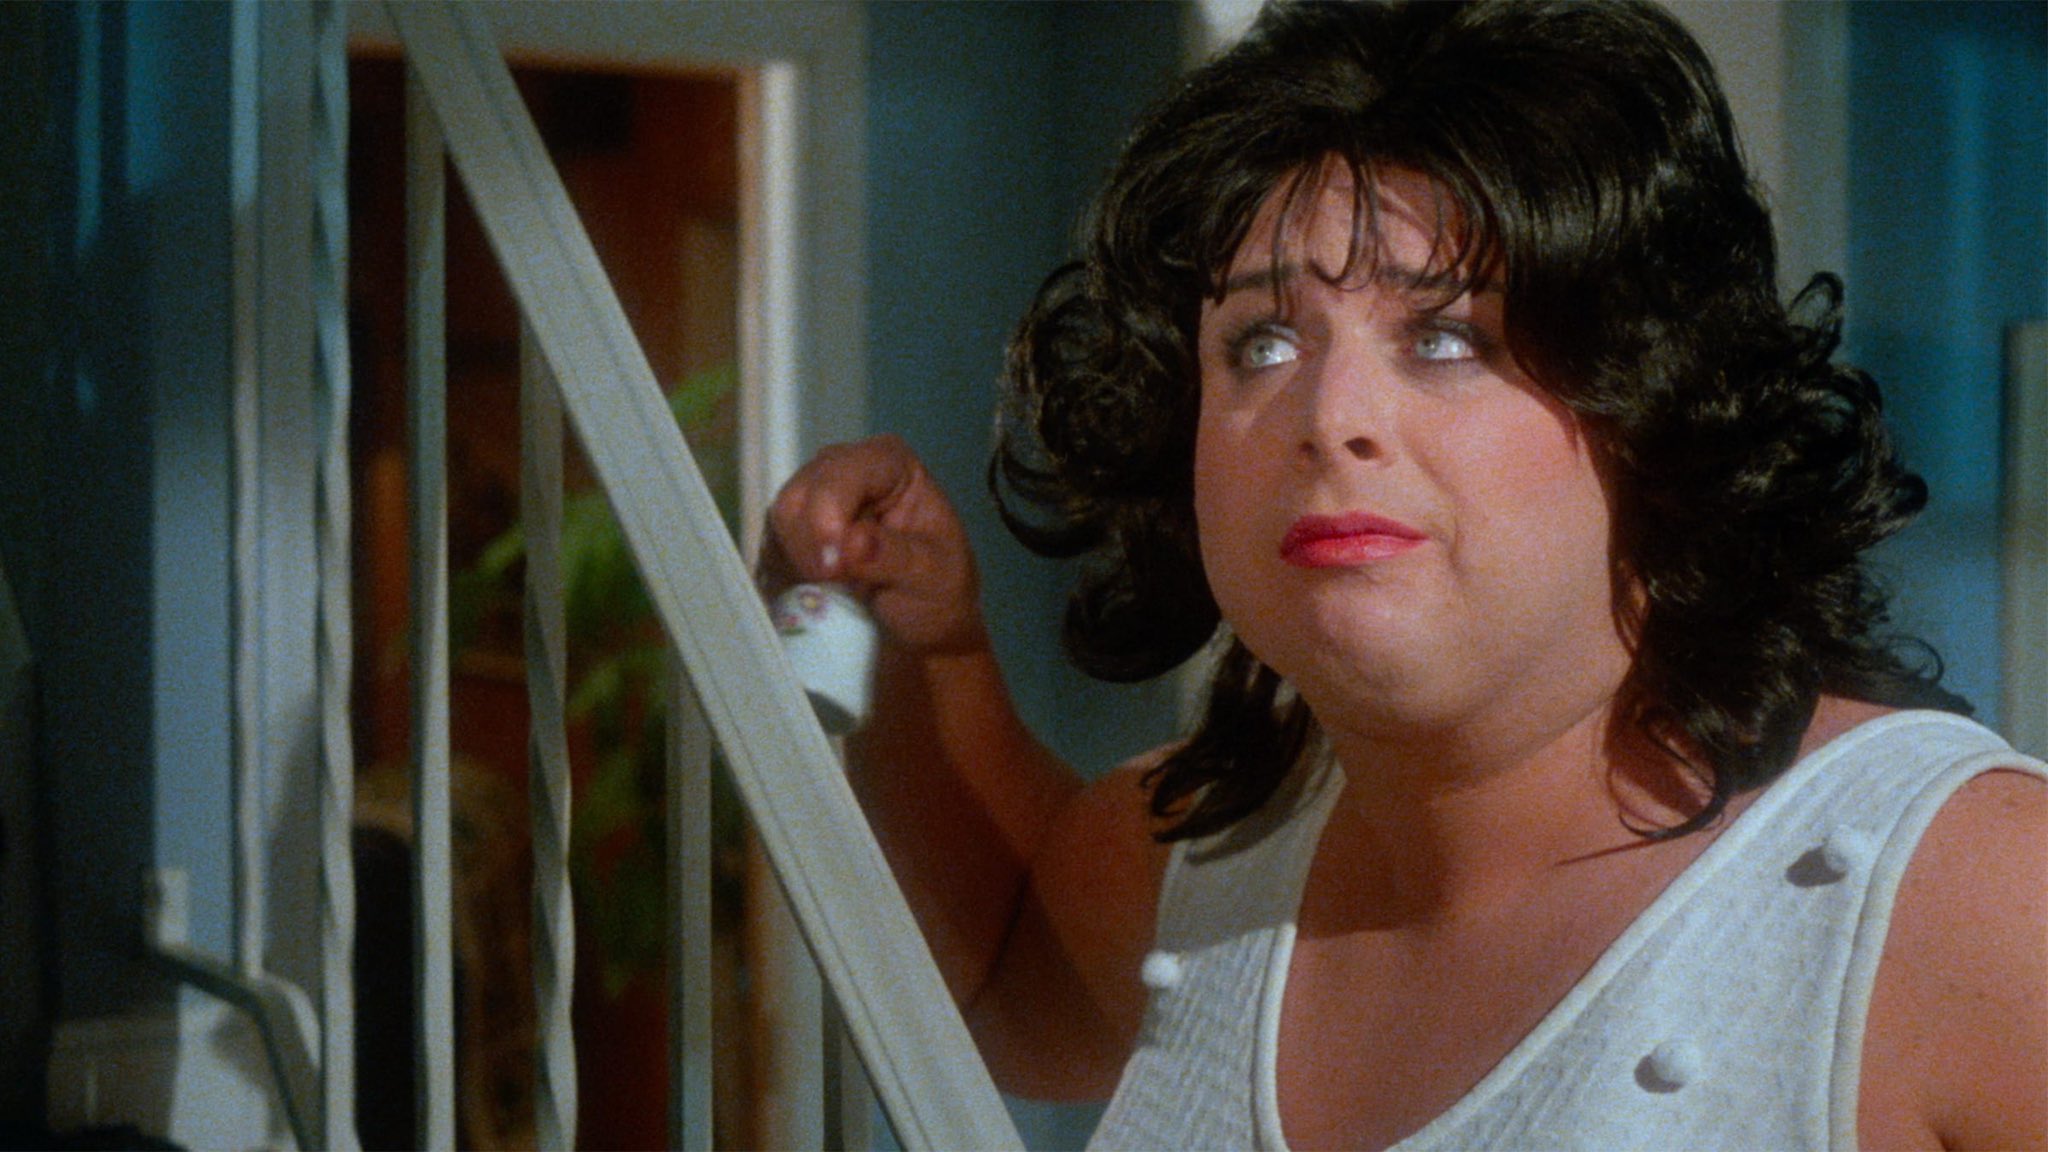 Happy birthday John Waters, favorite director of all time. 
Polyester (1981) first viewing this evening 4.5/5 